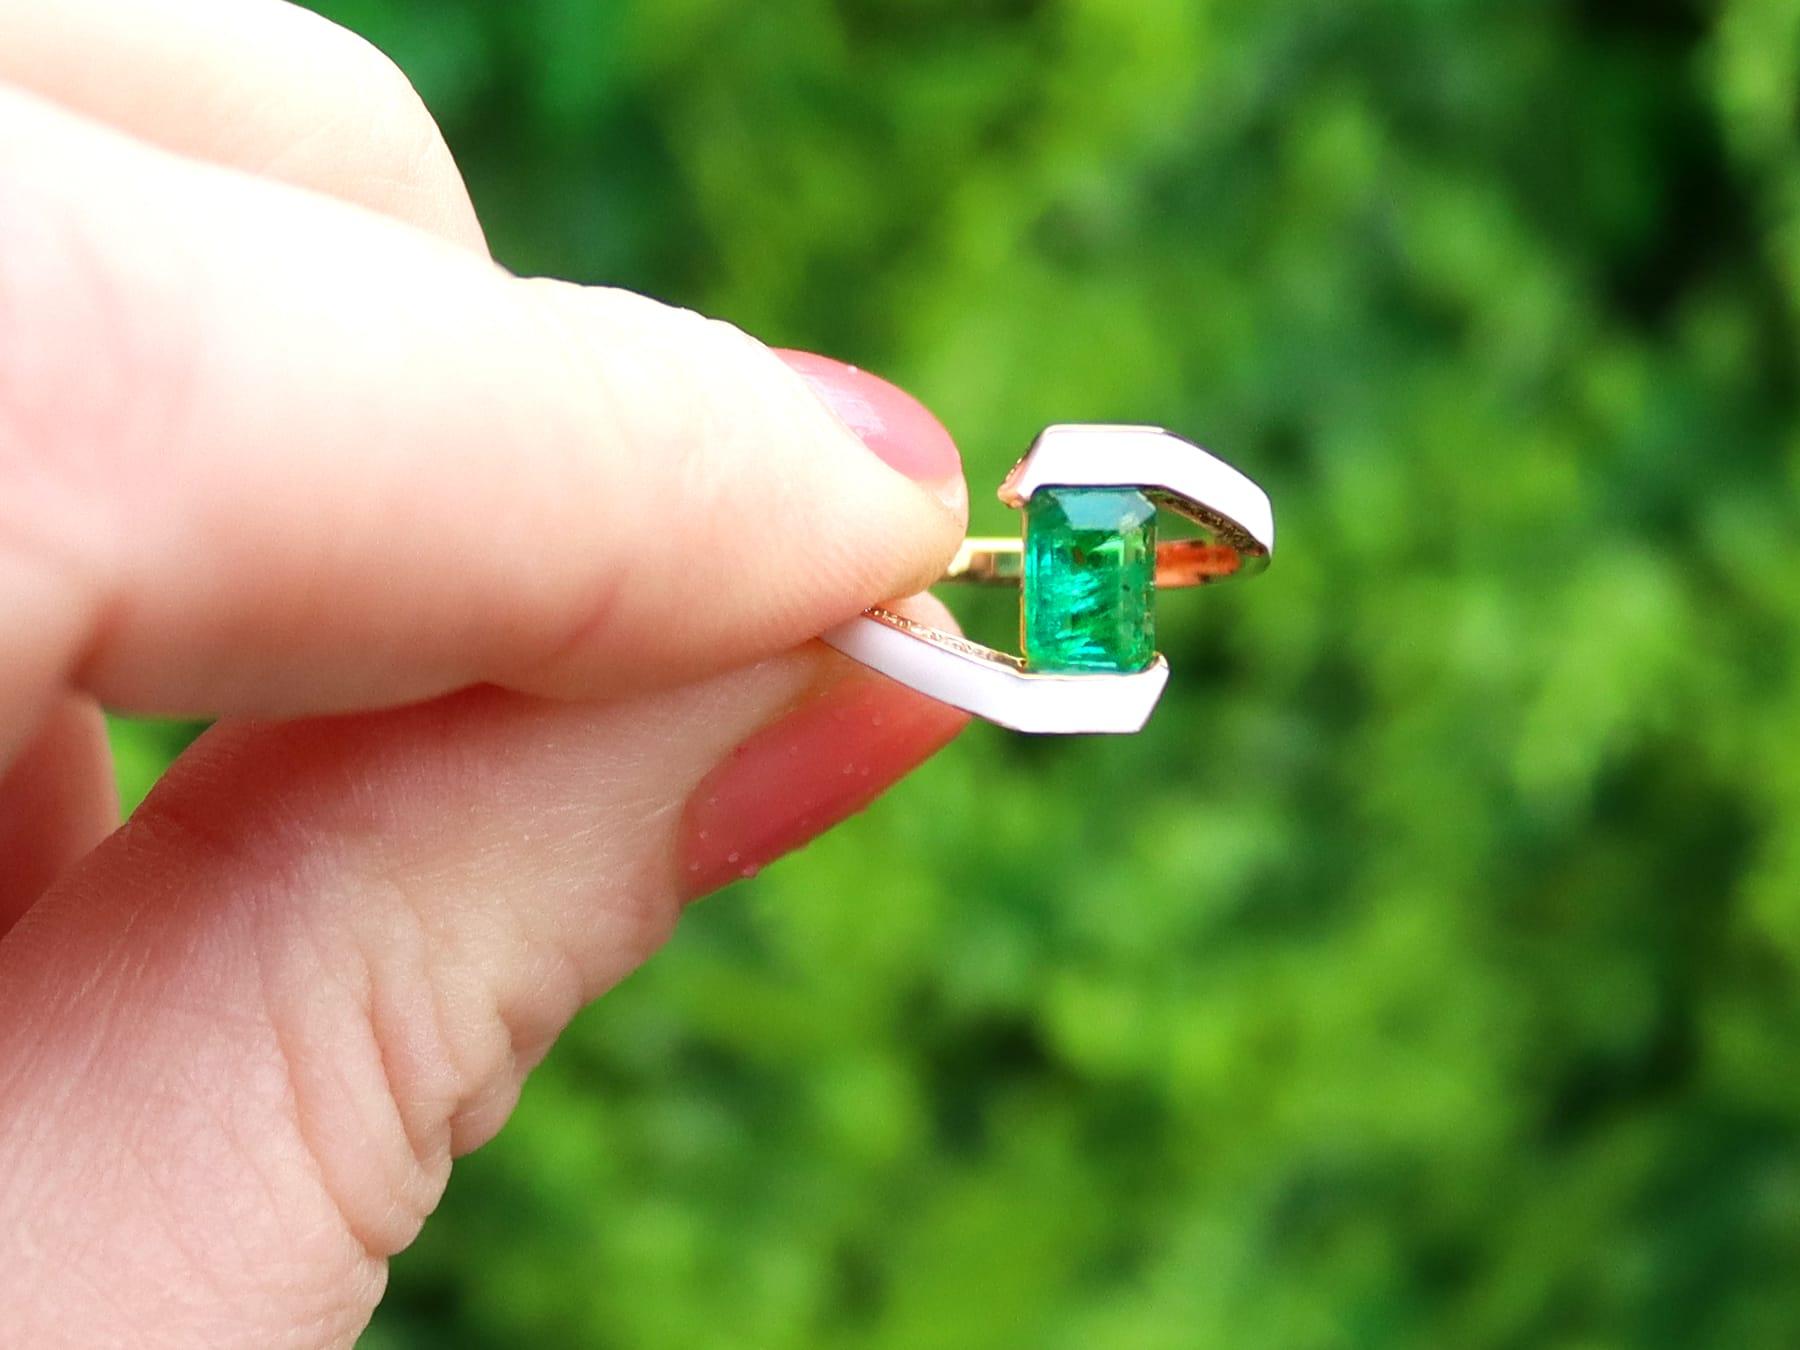 A fine and impressive 0.83 carat emerald, enamel and 0.09 carat diamond, 18 karat yellow gold twist ring; part of our diverse vintage jewelry collections

This fine and impressive vintage emerald ring has been crafted in 18k yellow gold.

The twist